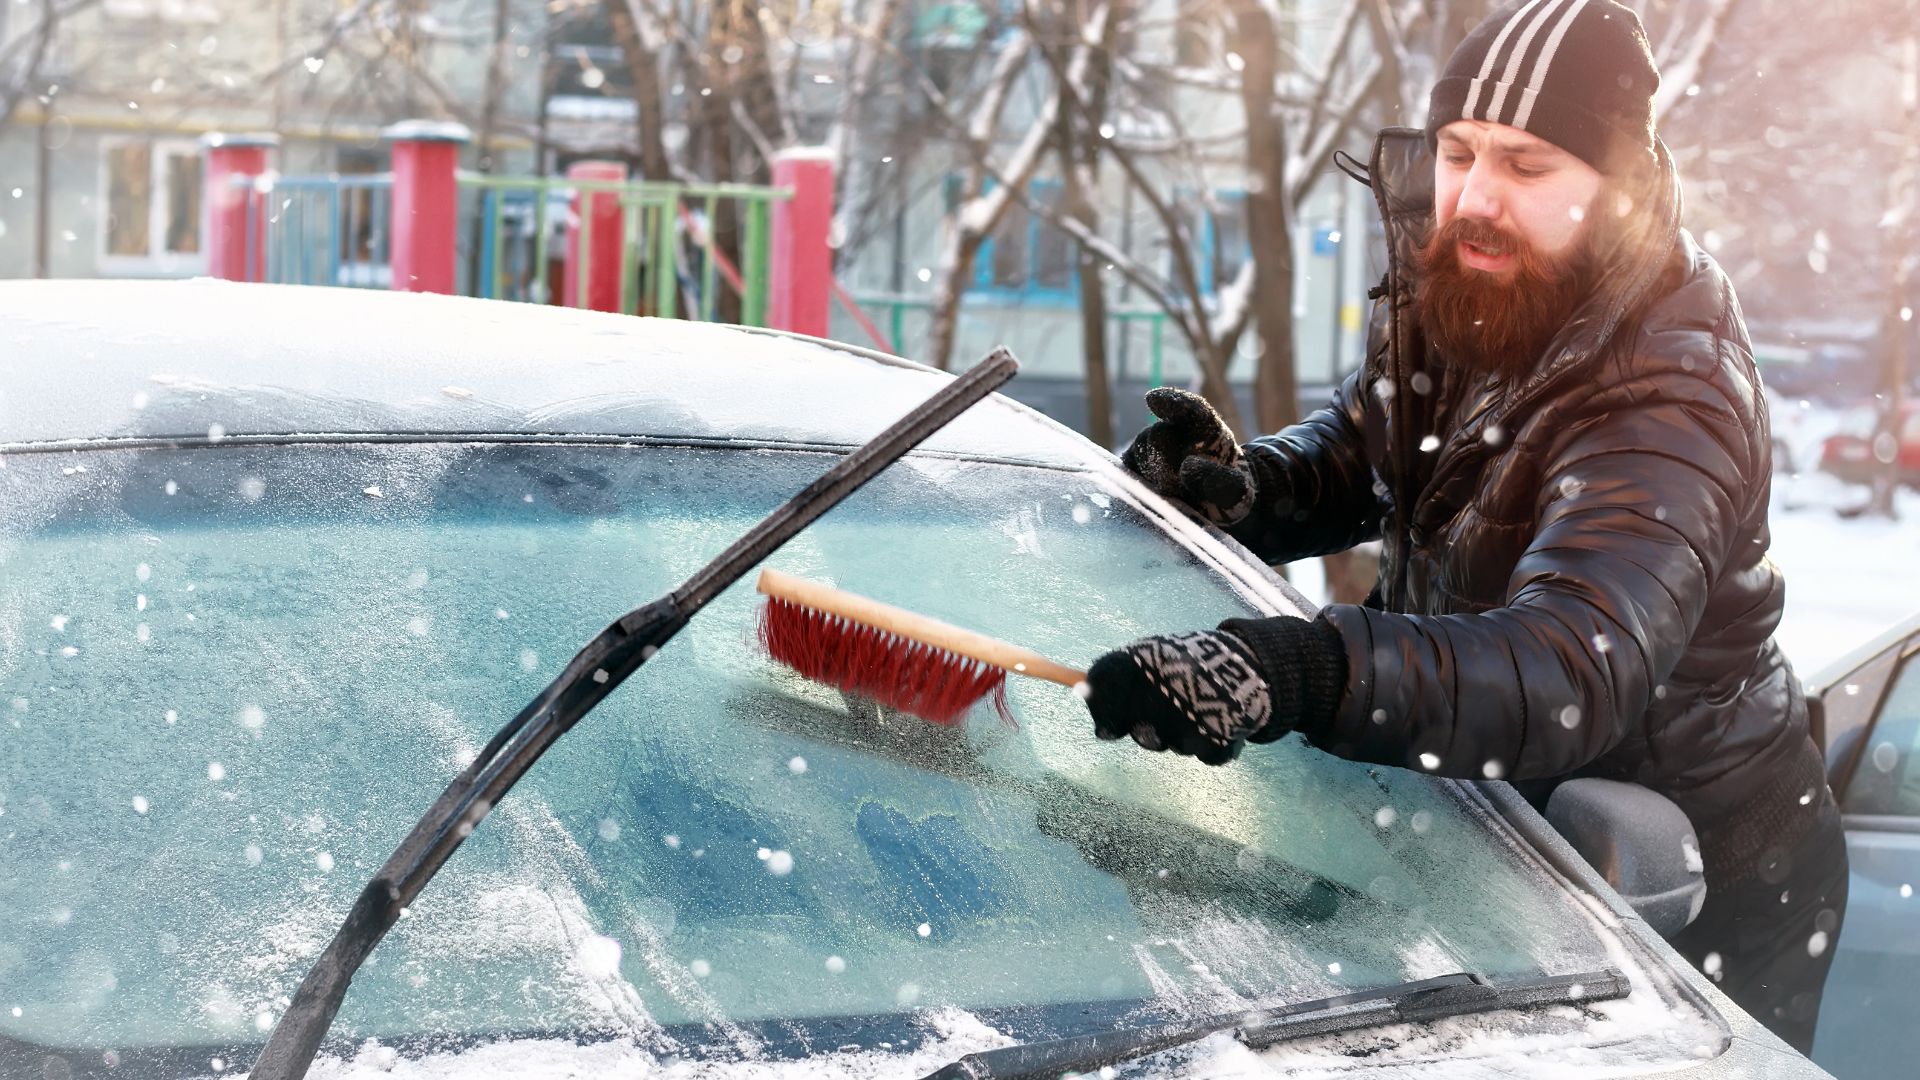 end of icy windscreens and wipers